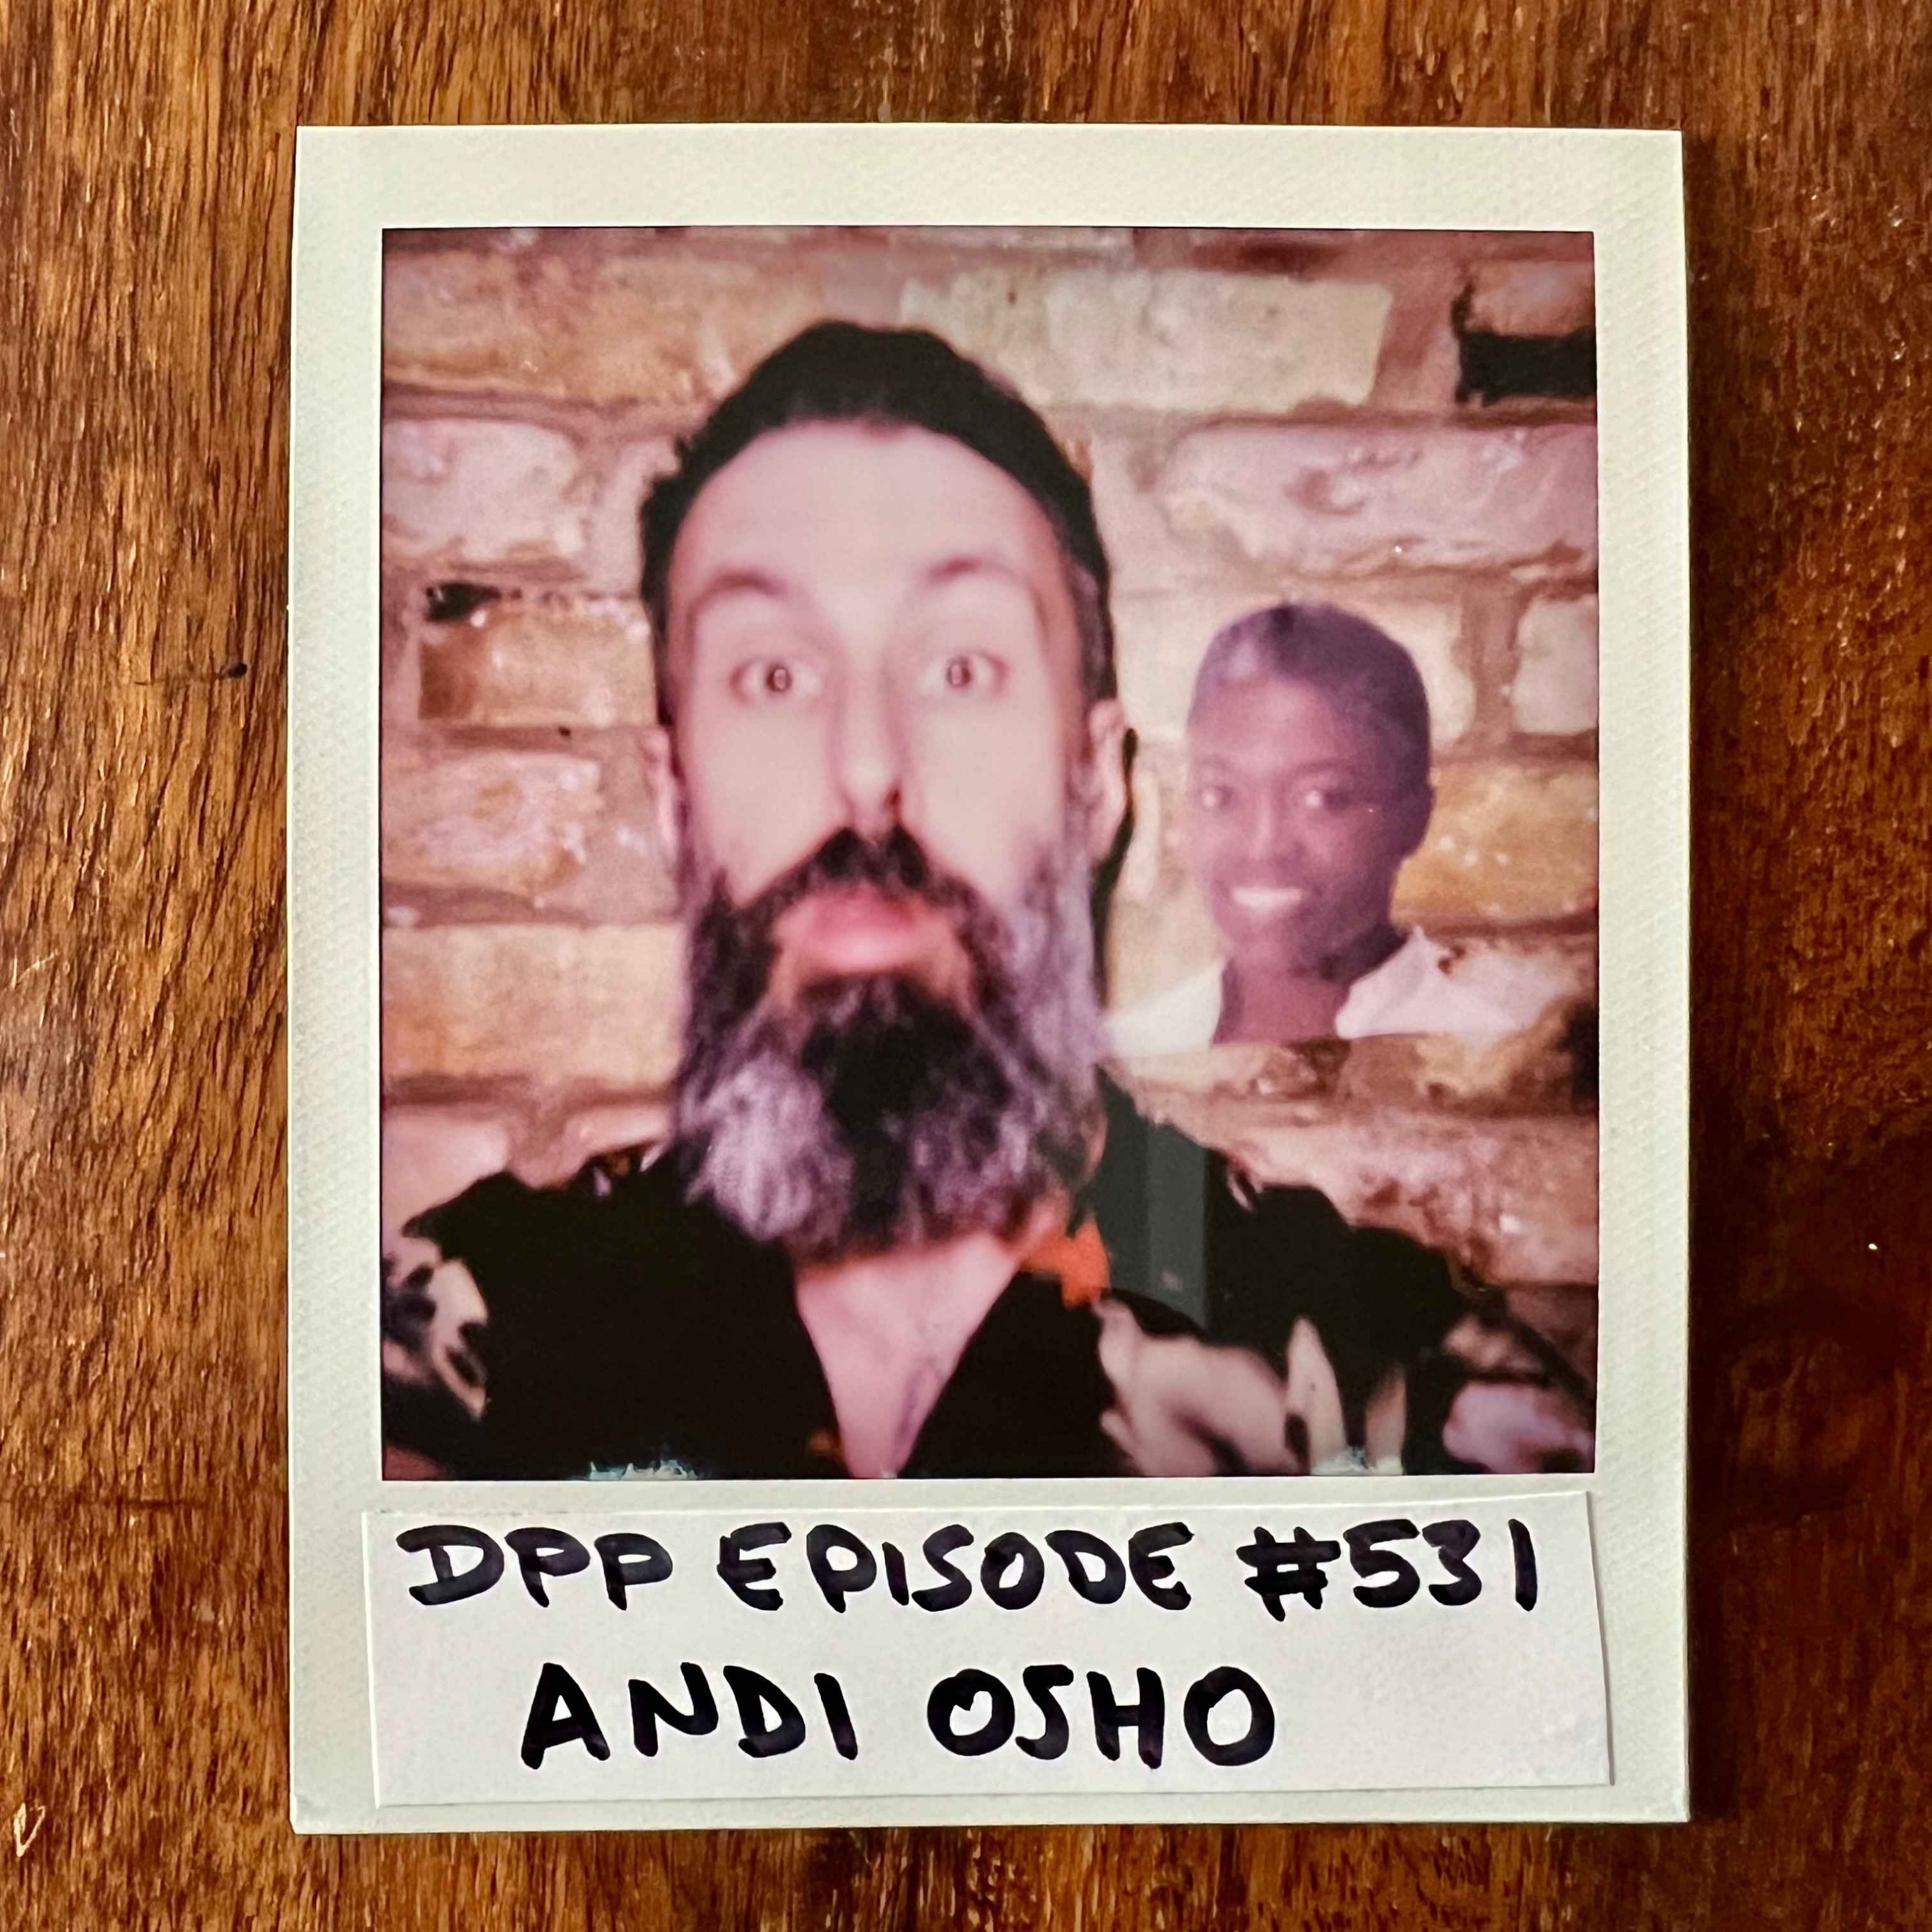 Andi Osho • Distraction Pieces Podcast with Scroobius Pip #531